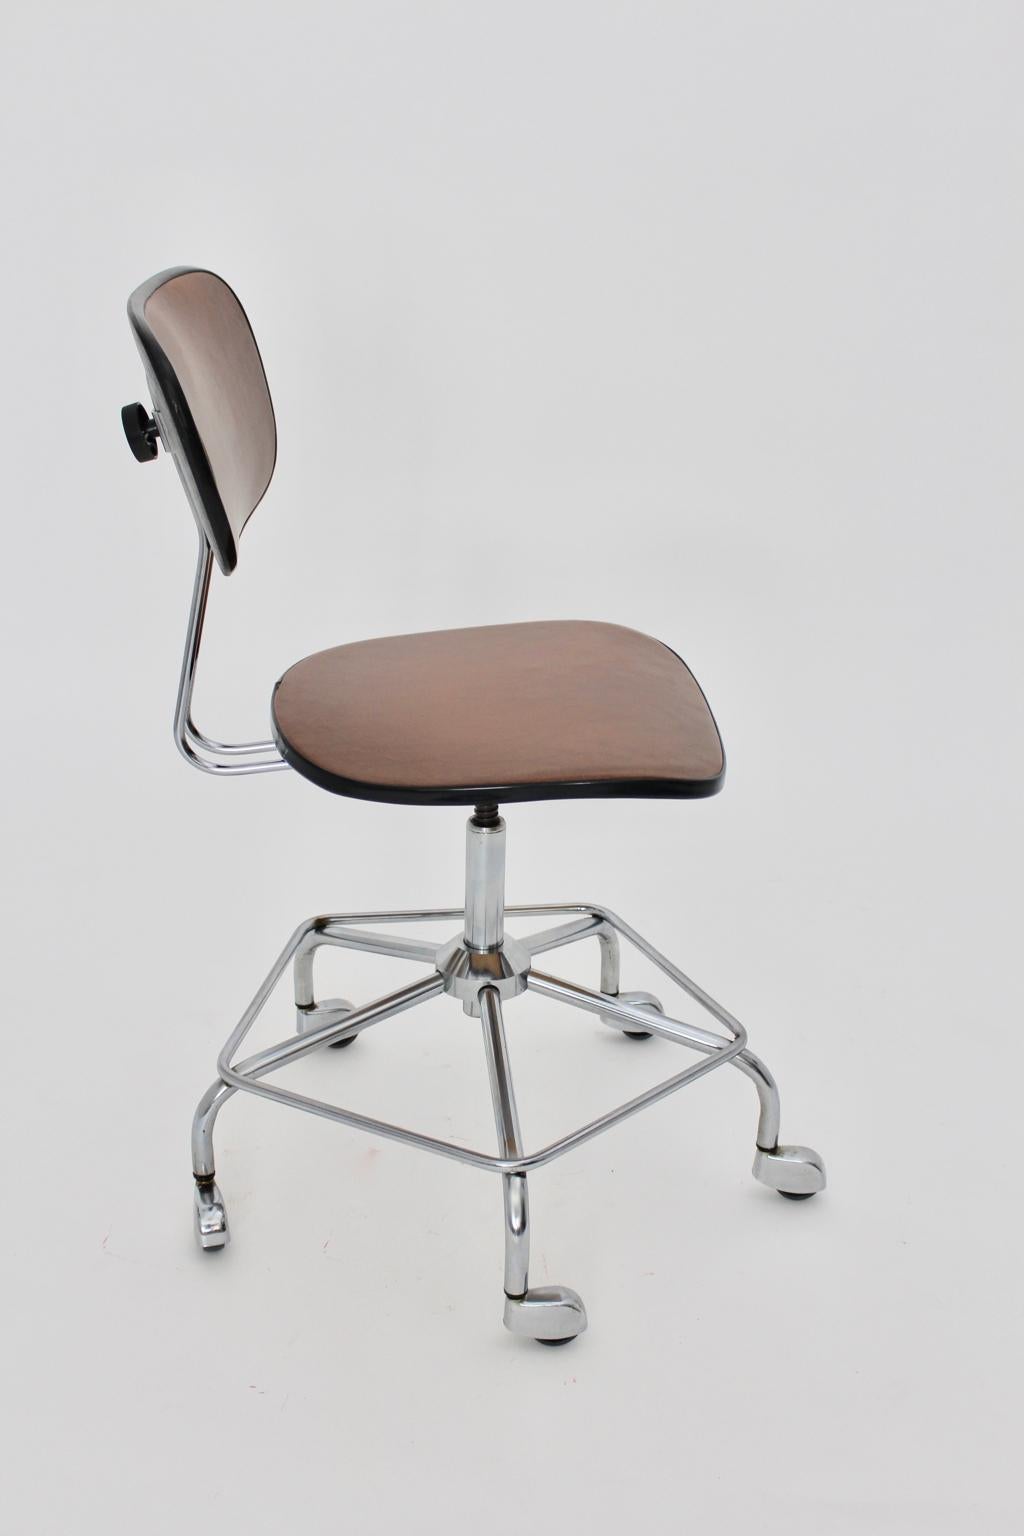 Mid-Century Modern Vintage Desk Chair Attributed to Egon Eiermann, 1950, Germany For Sale 1